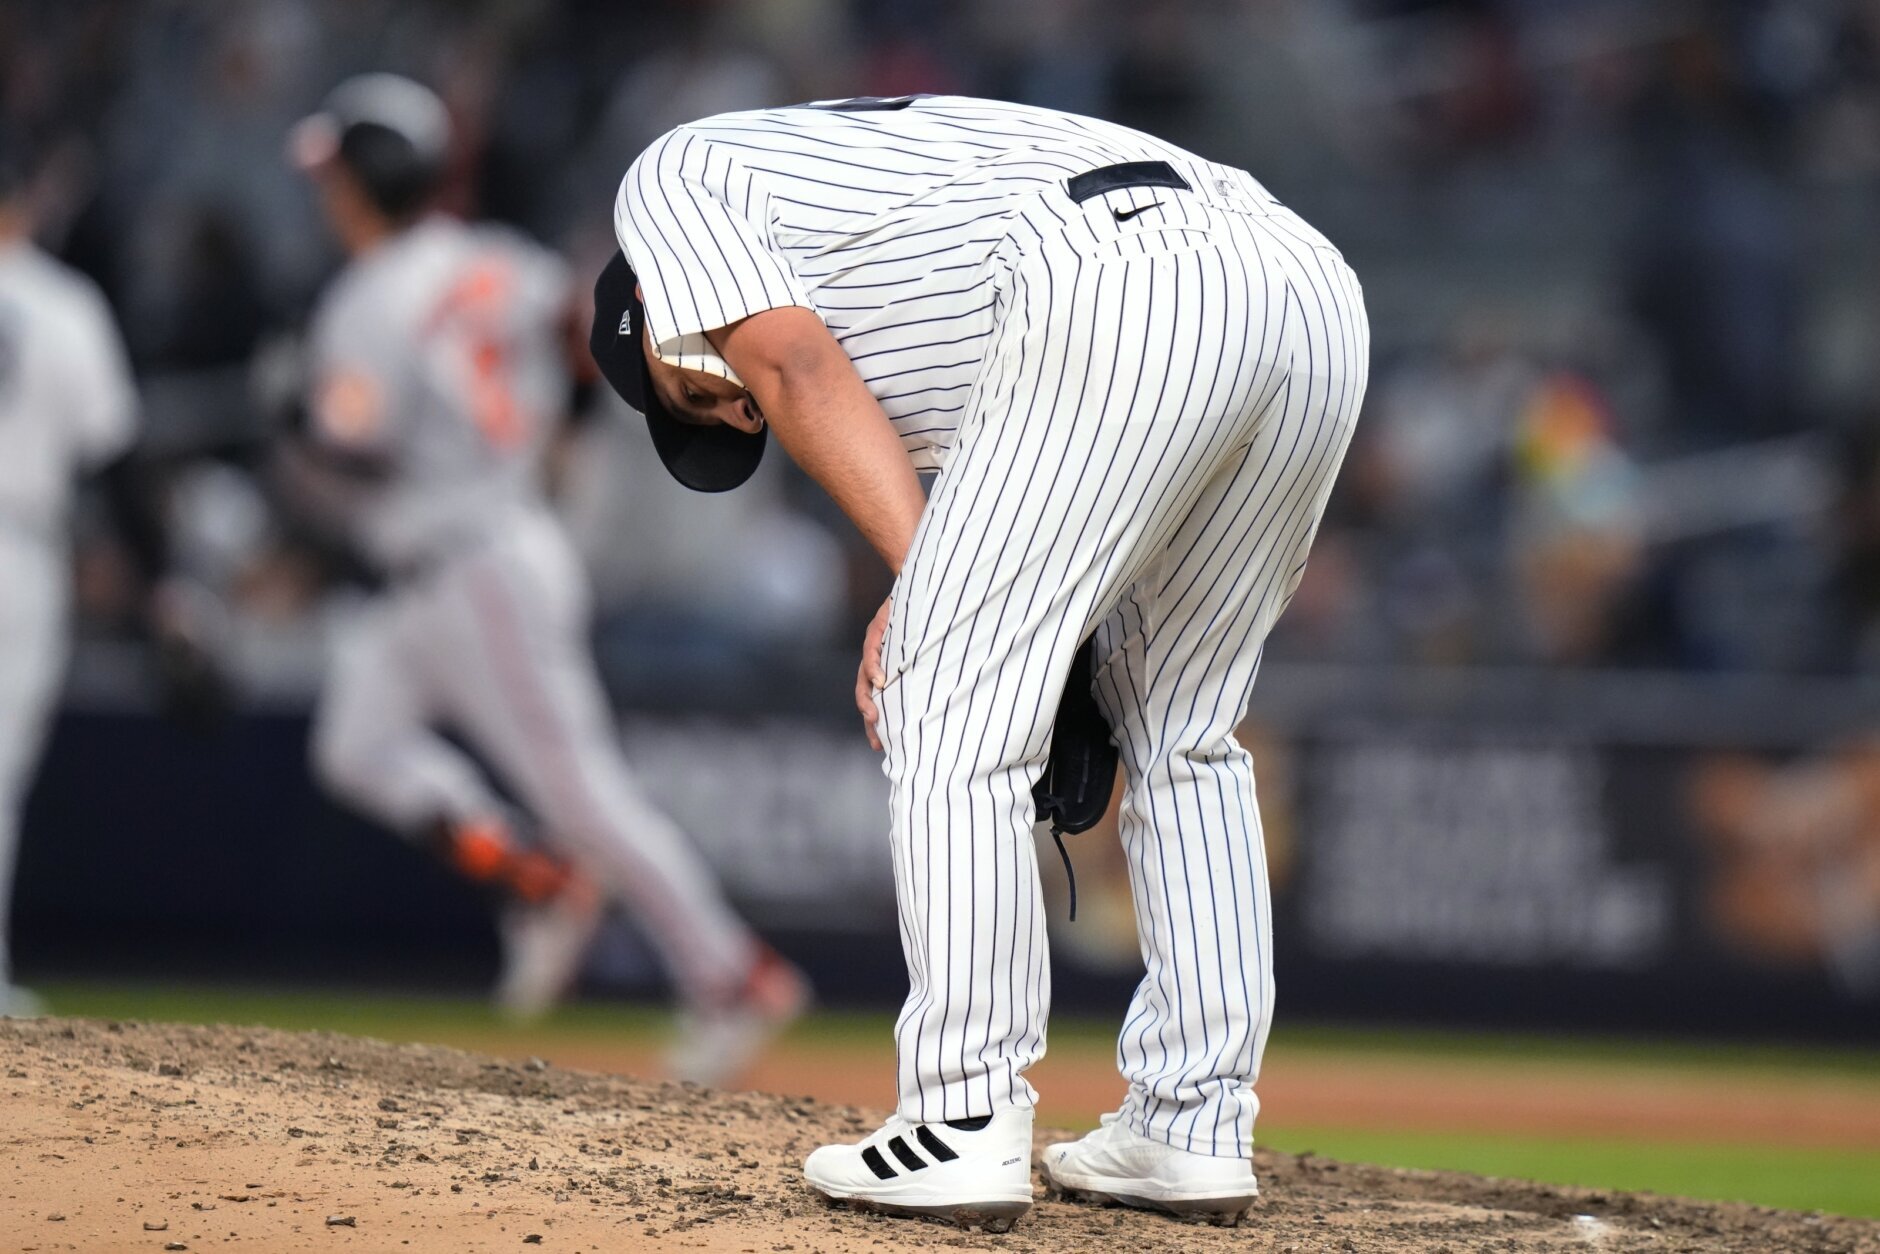 Nestor Cortes' big follow up year with Yankees off to inauspicious start